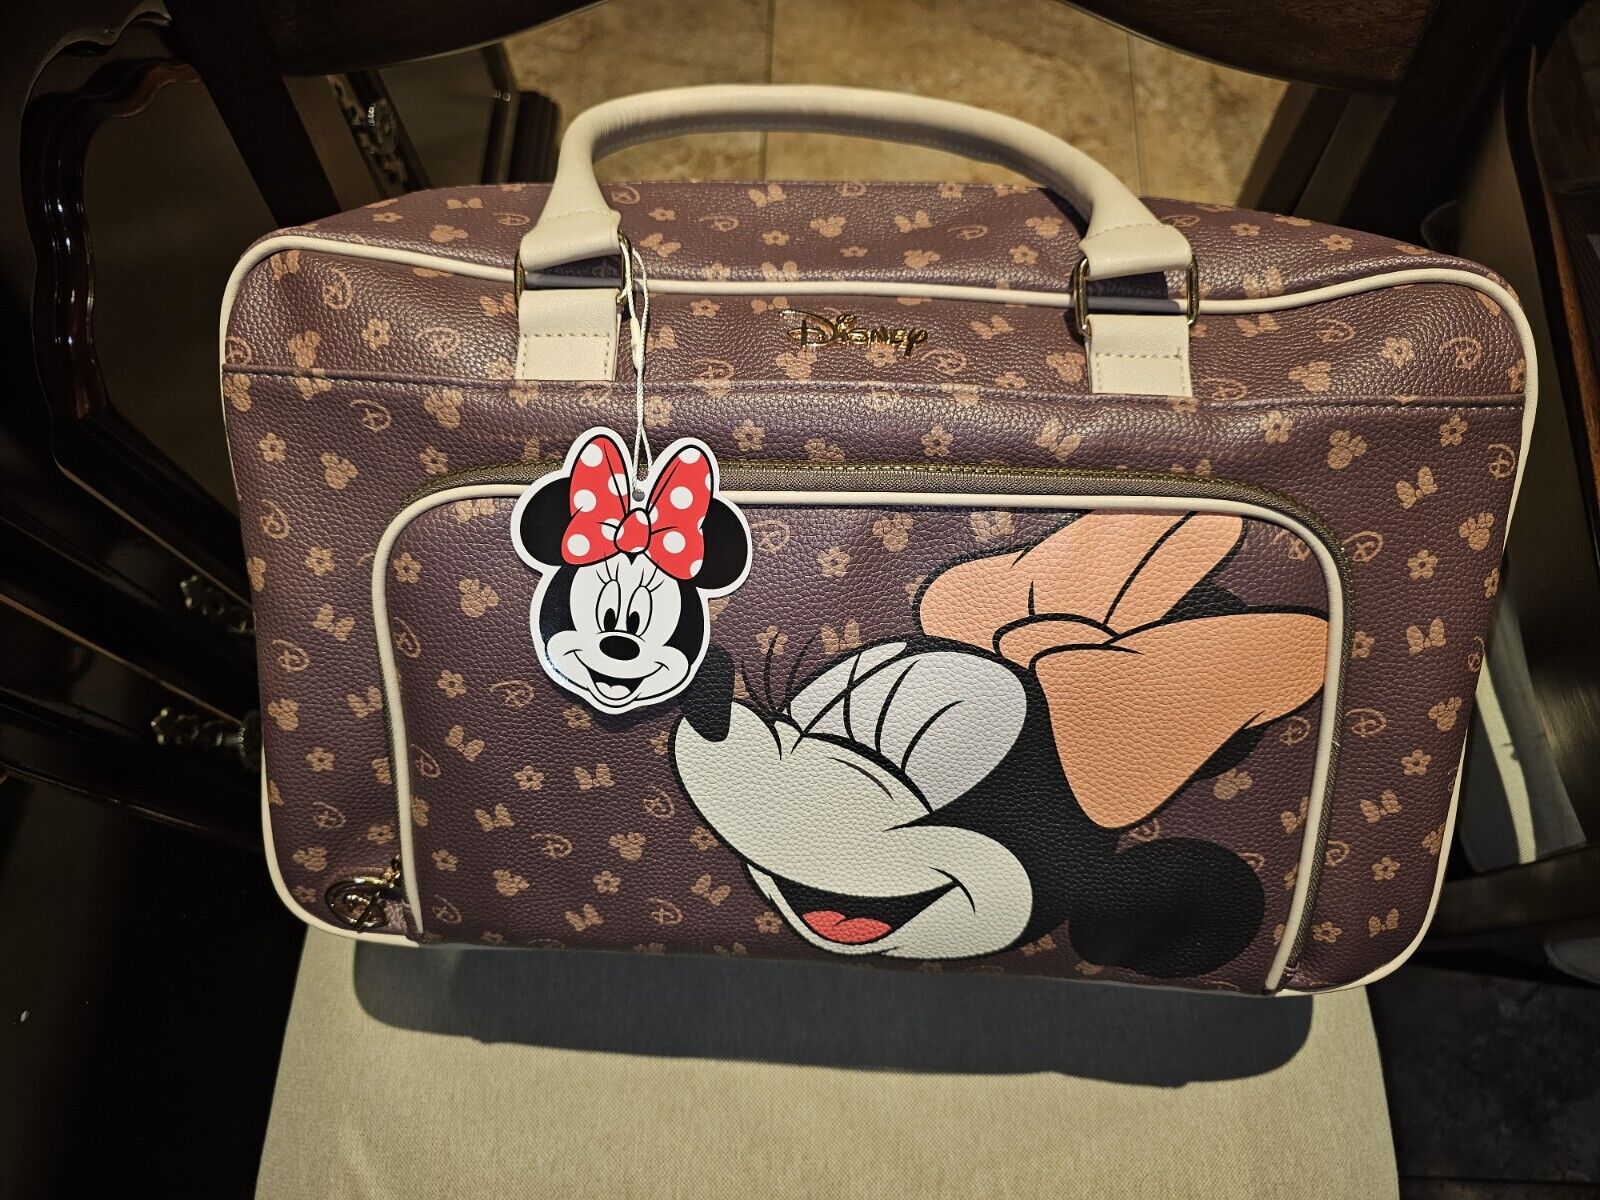 Disney Minnie Mouse Faux Leather Weekender Overnight Travel Bag *Primark*-NEW